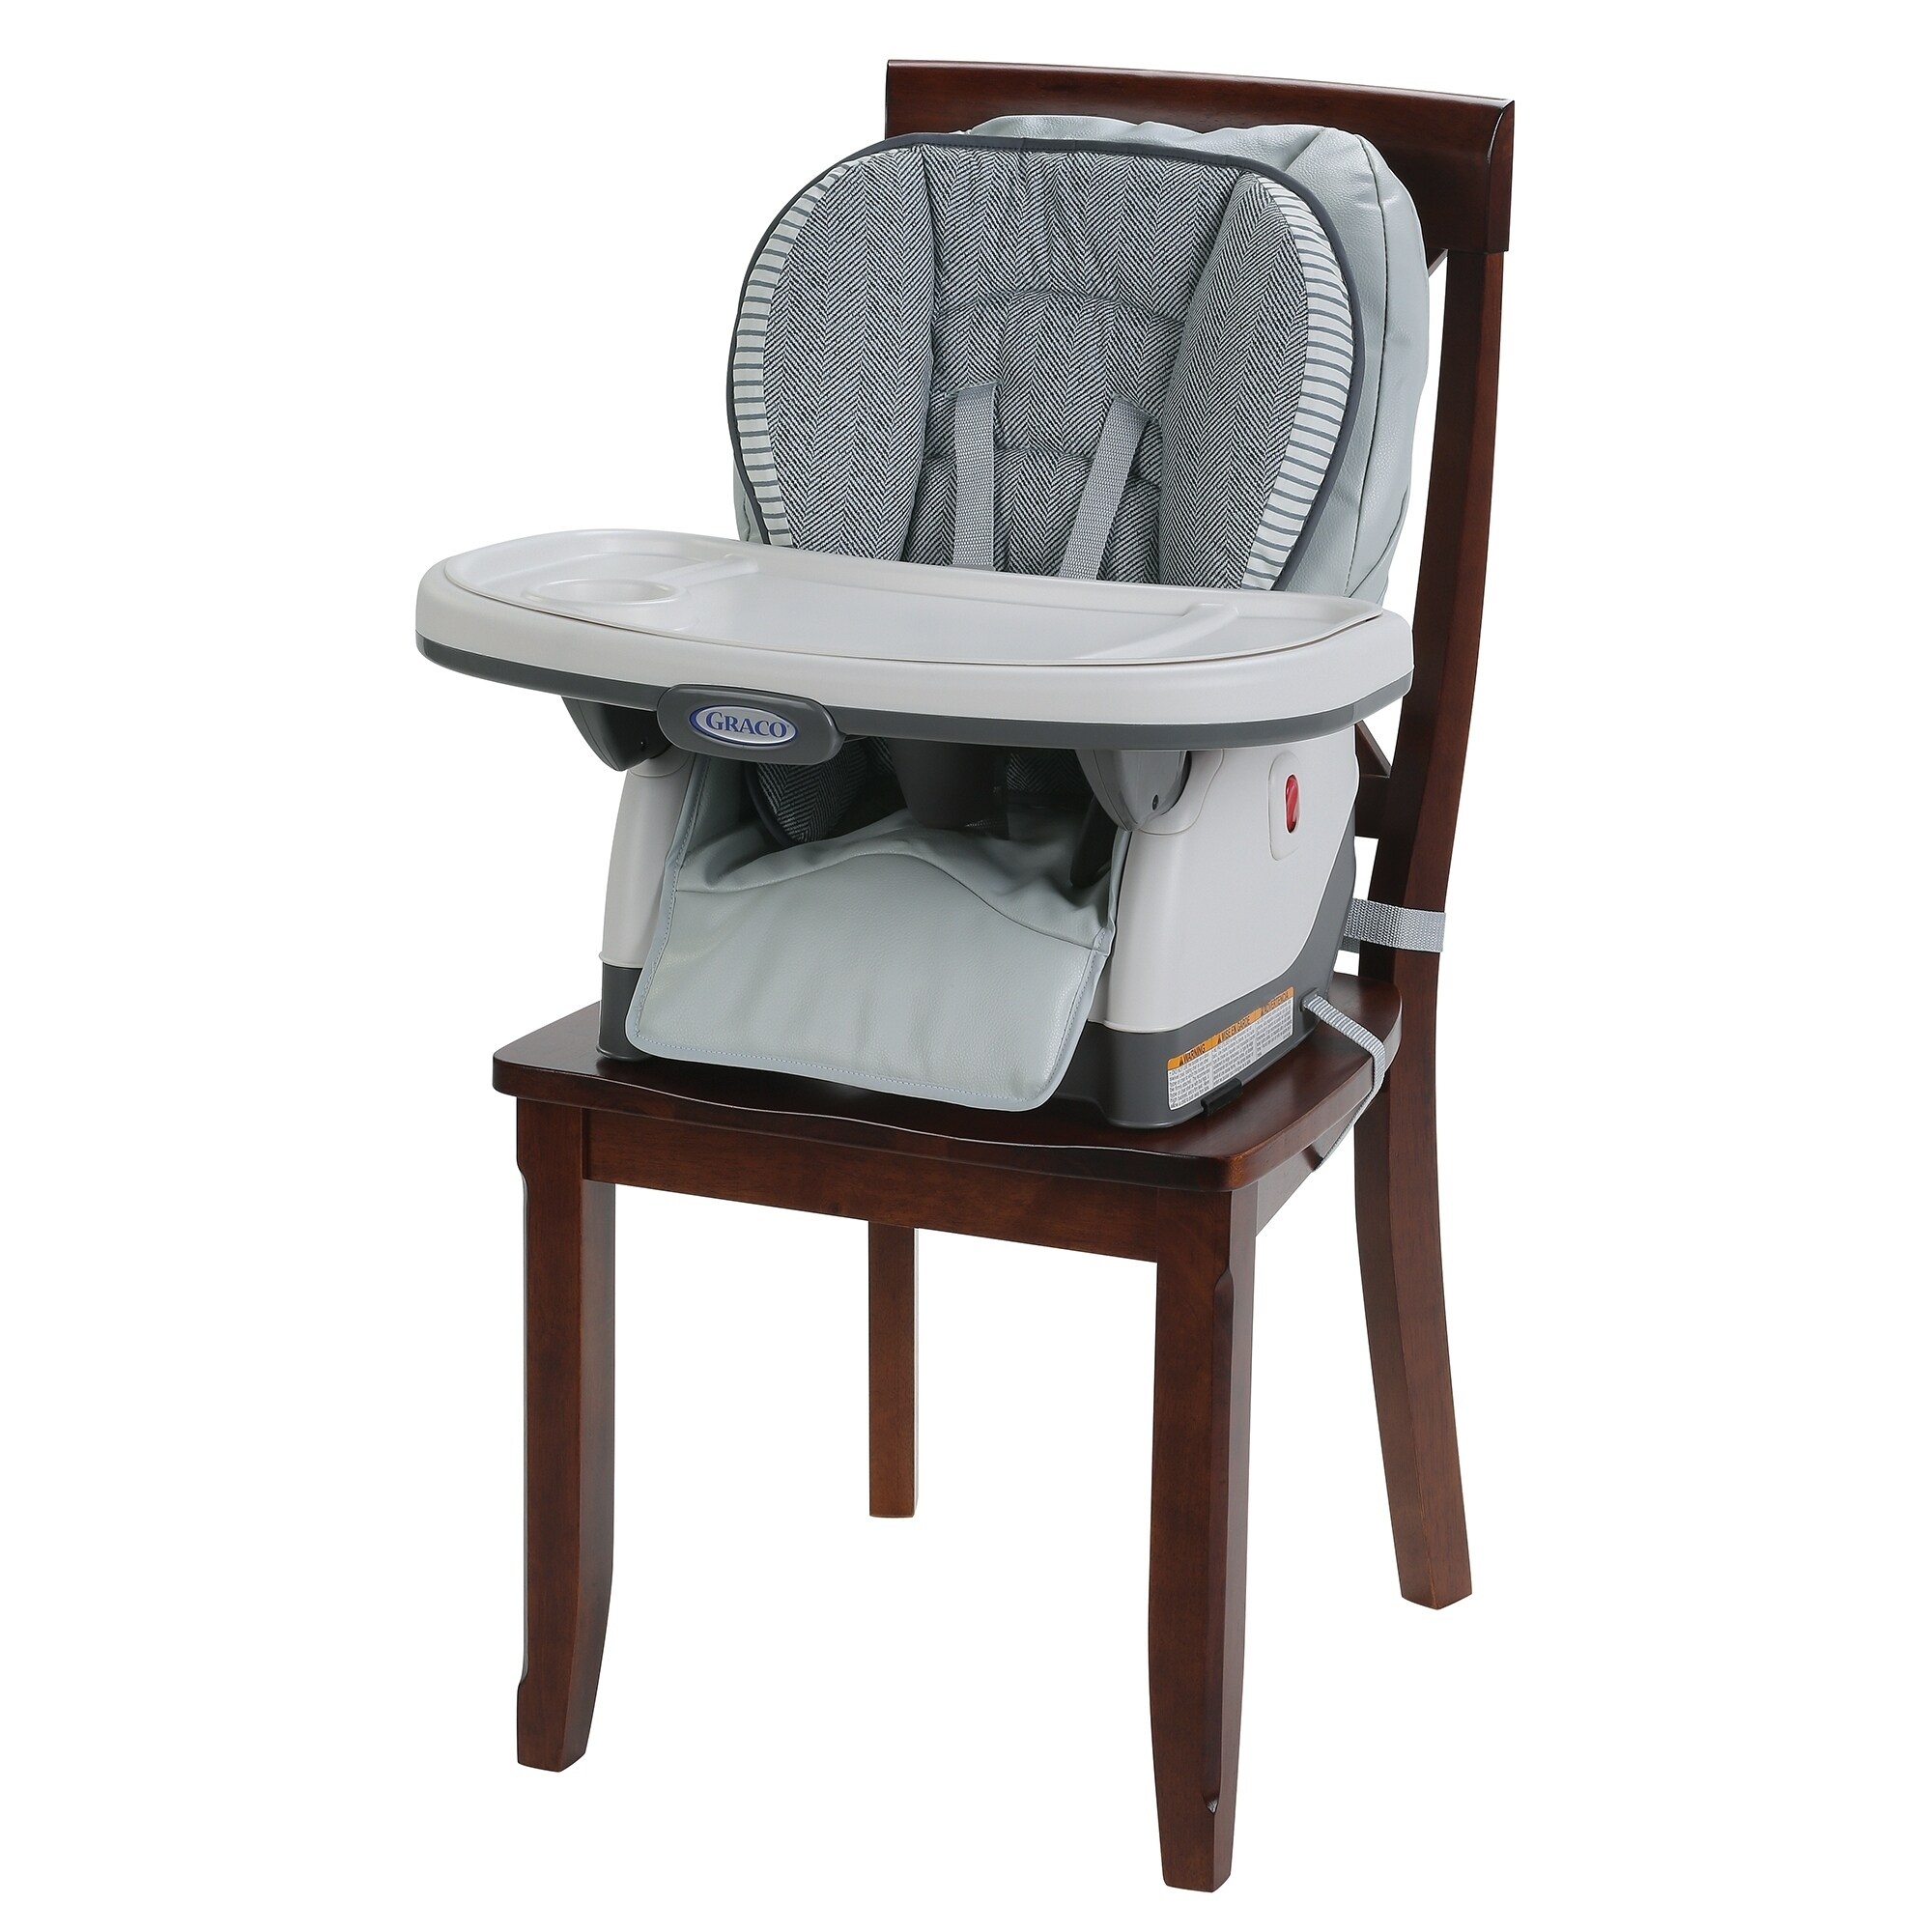 Shop Graco Blossom Lx 6 In 1 Convertible High Chair Raleigh